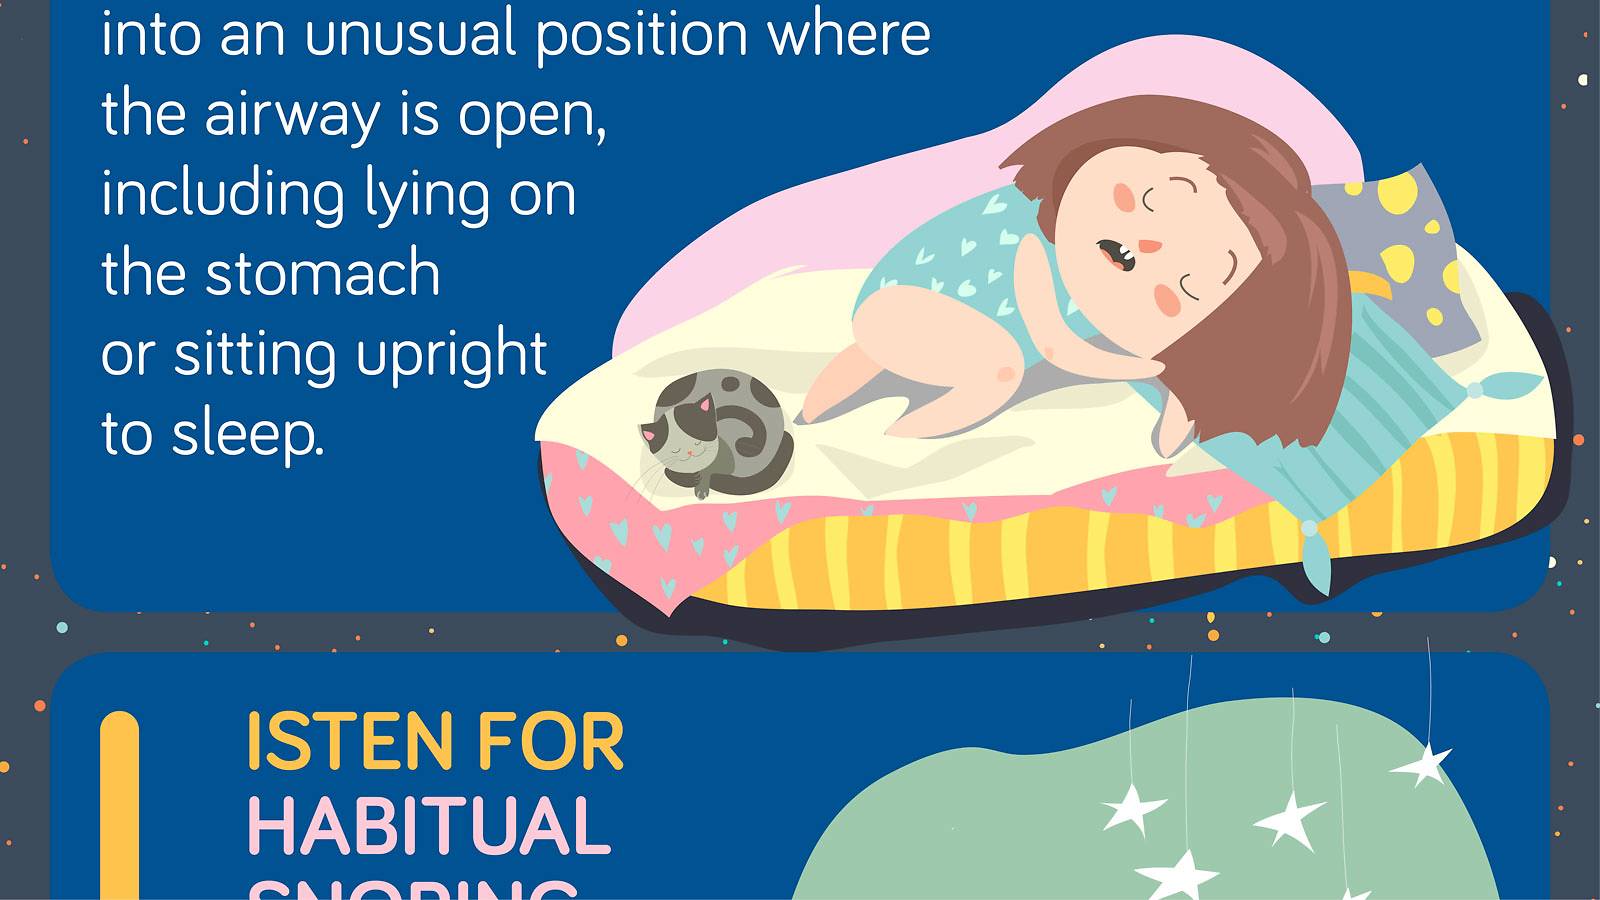 Tots-3-simple-steps-to-tell-if-your-child-has-Obstructive-Sleep-Apnea-Infographic-3